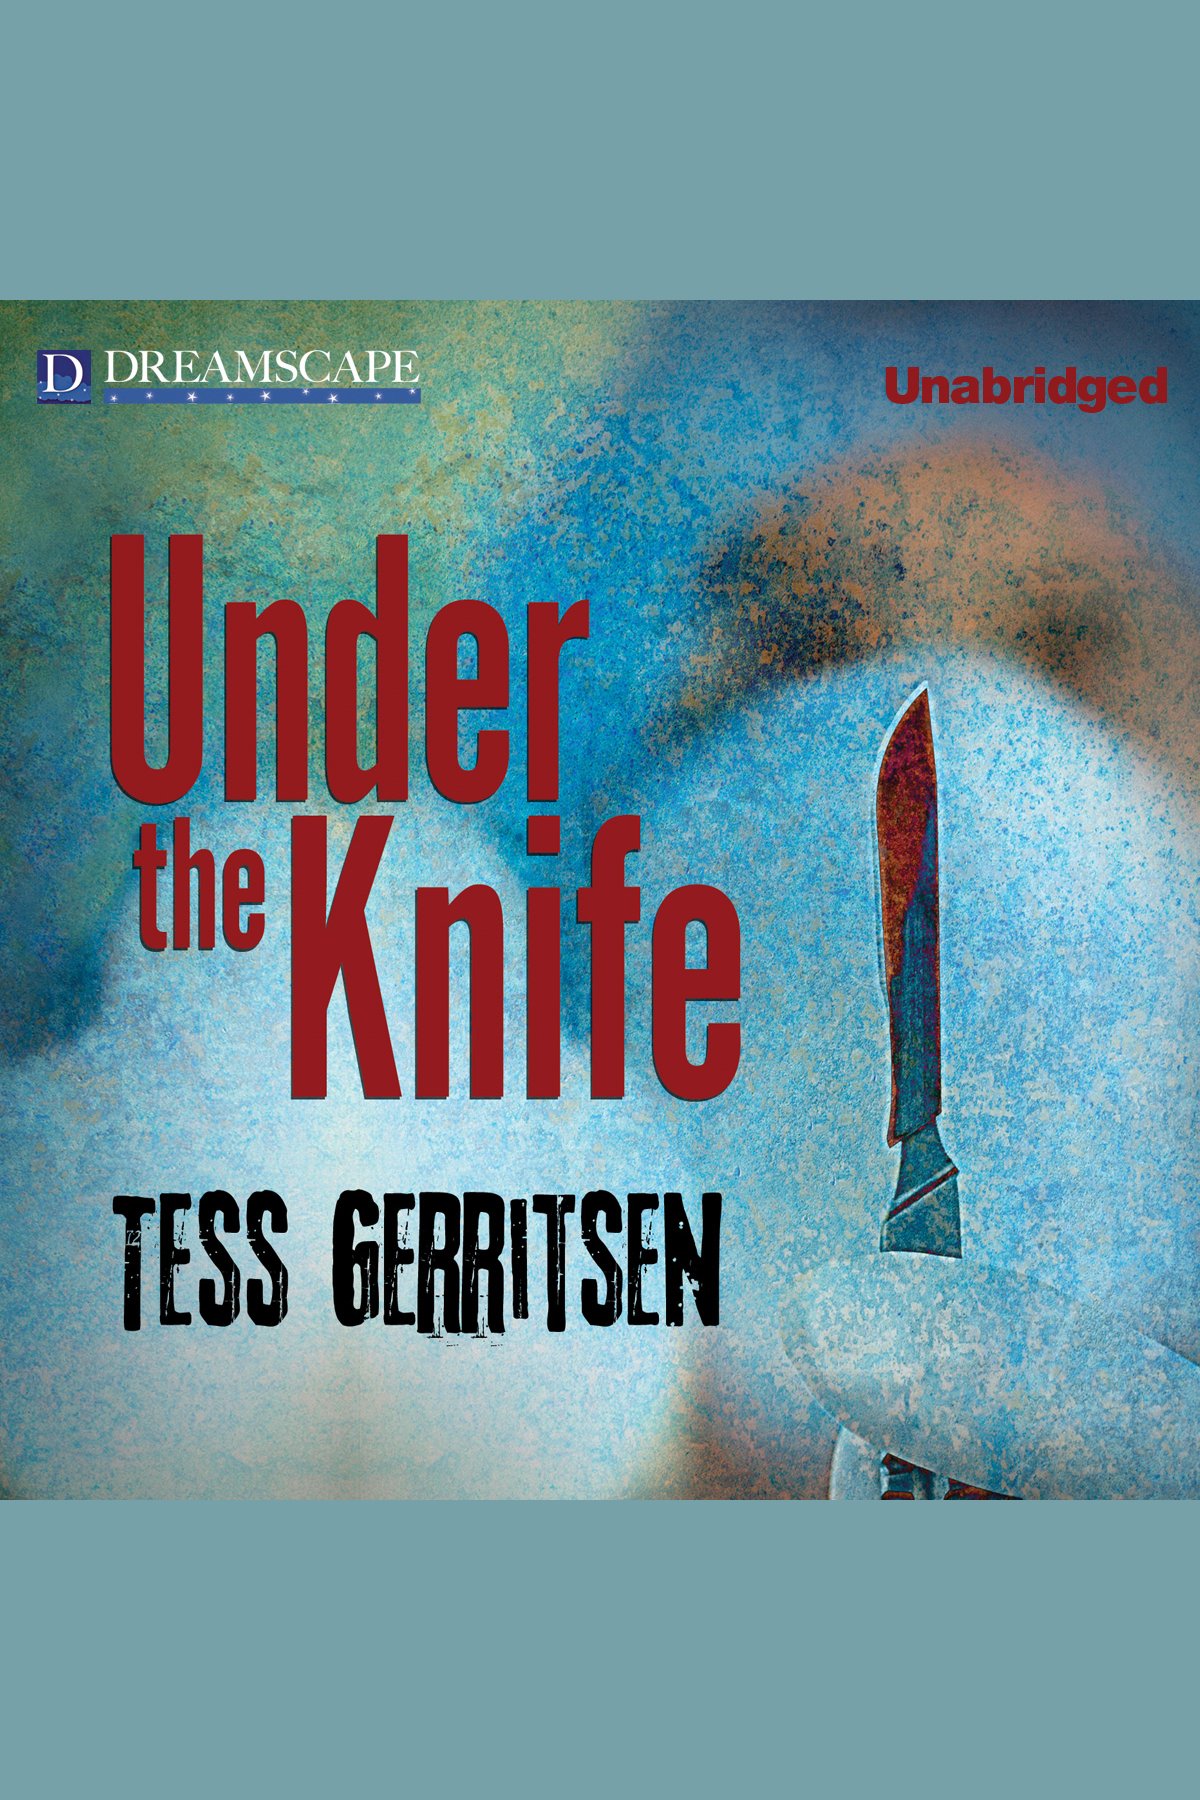 Under the knife cover image